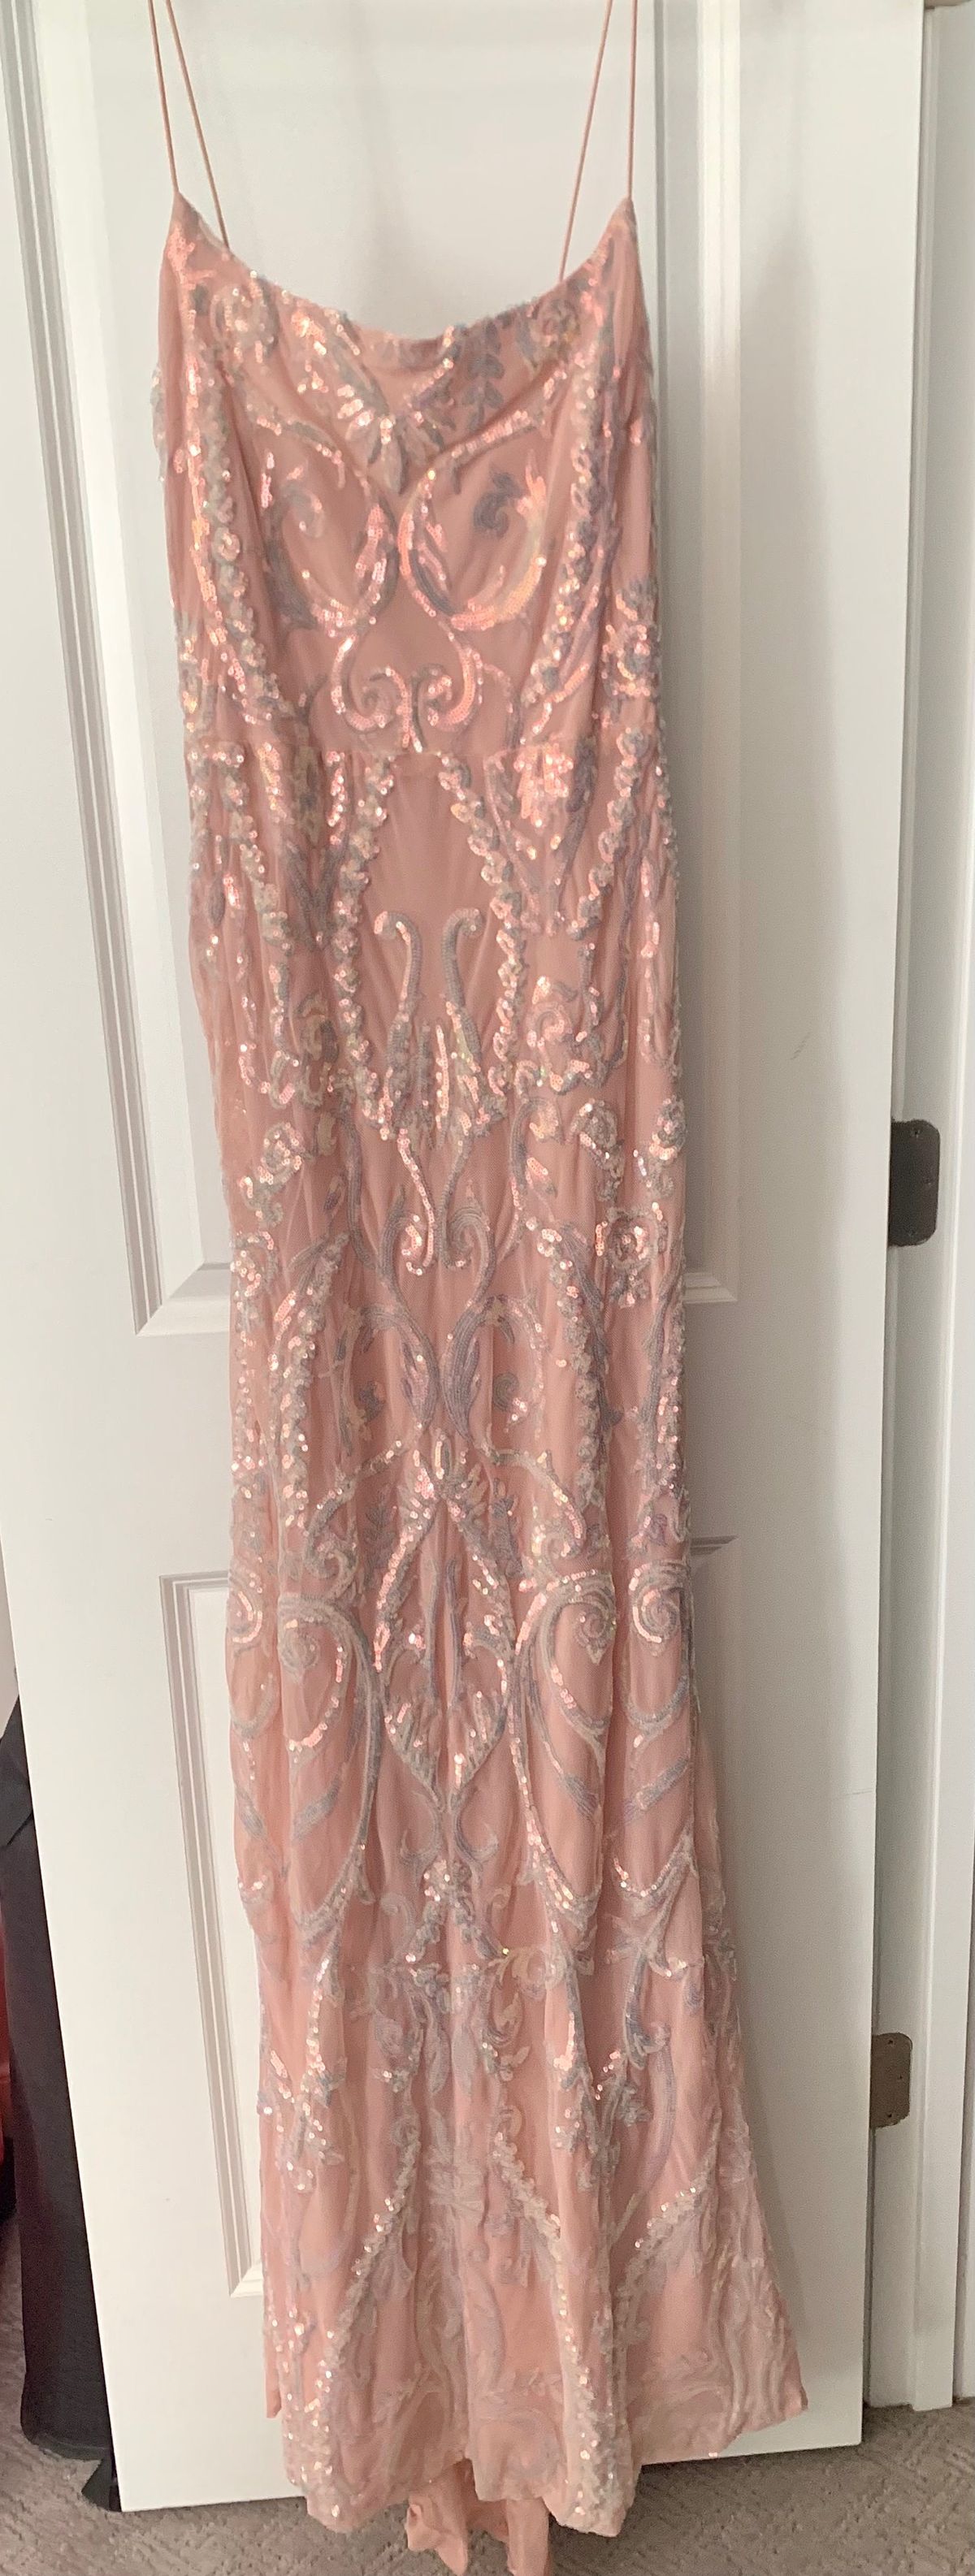 Windsor Size S Bridesmaid Light Pink Mermaid Dress on Queenly